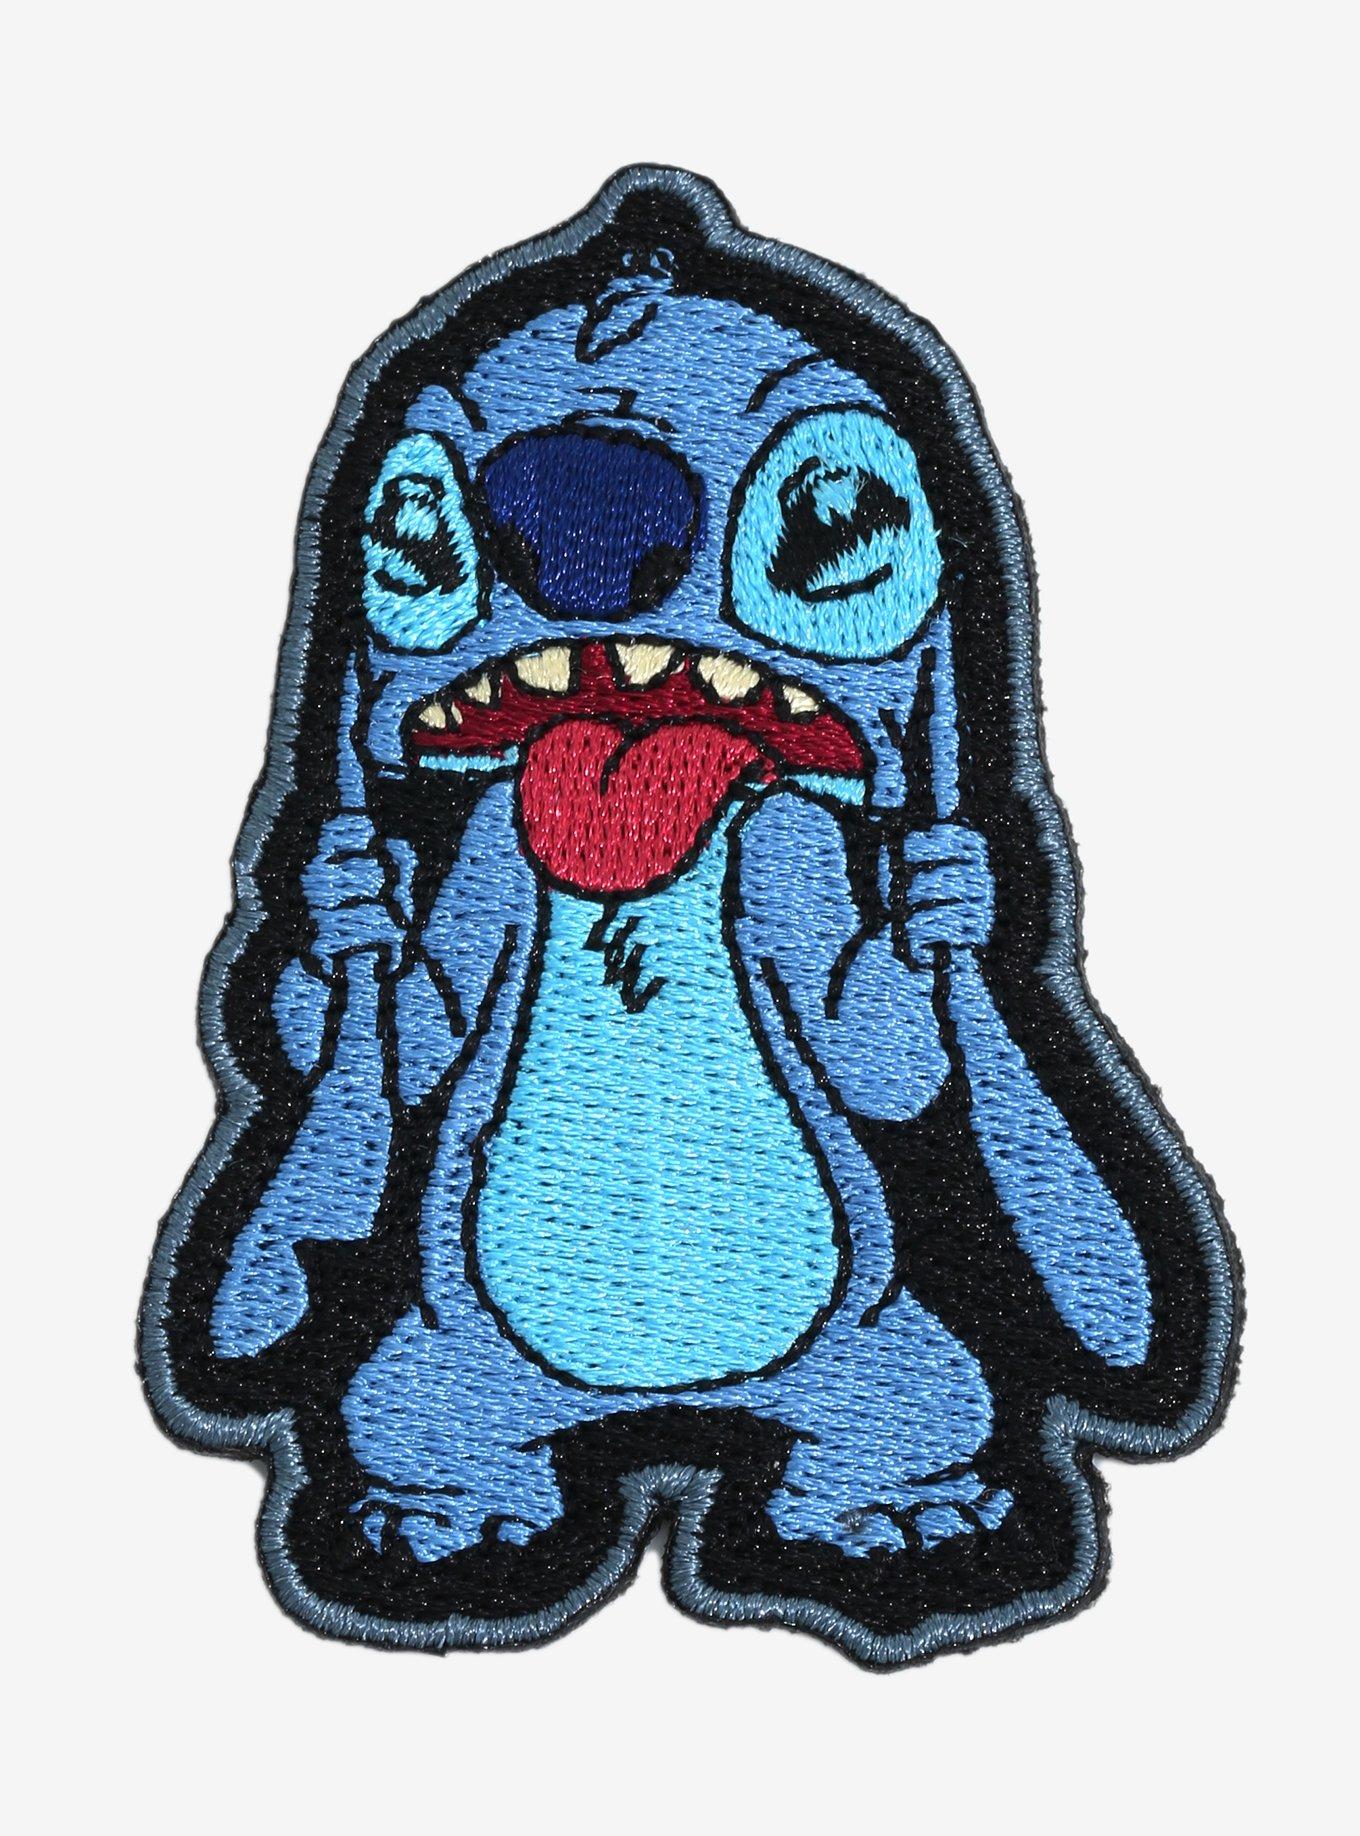 Happy Stitch with Glasses Patch Kids Disney Embroidered Iron on